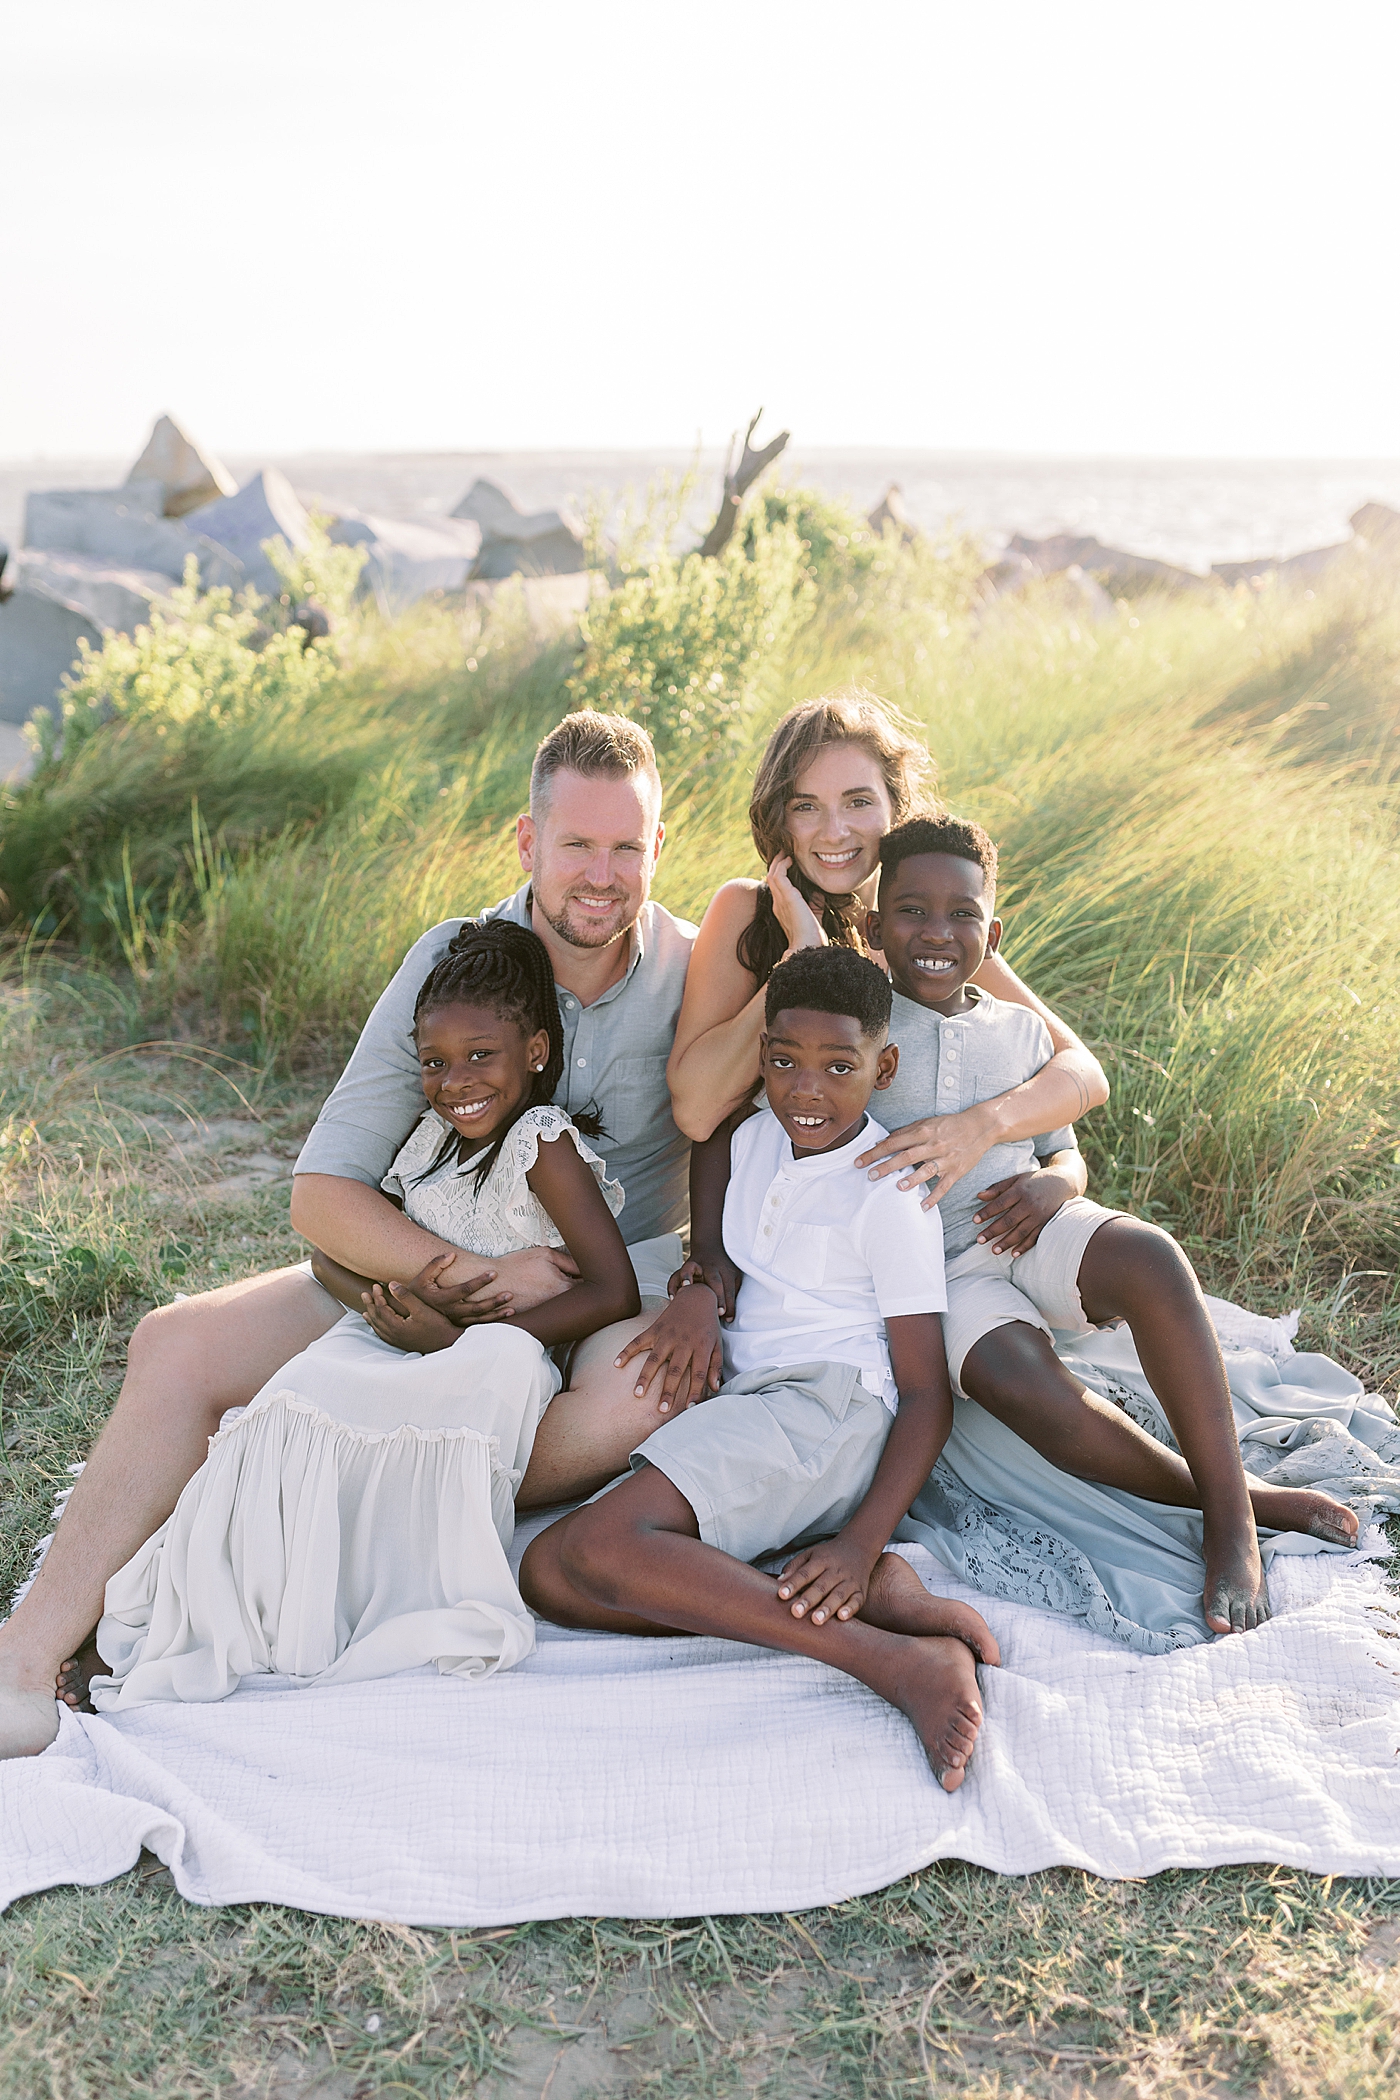 Family of five sitting on a picnic blanket | Image by Caitlyn Motycka